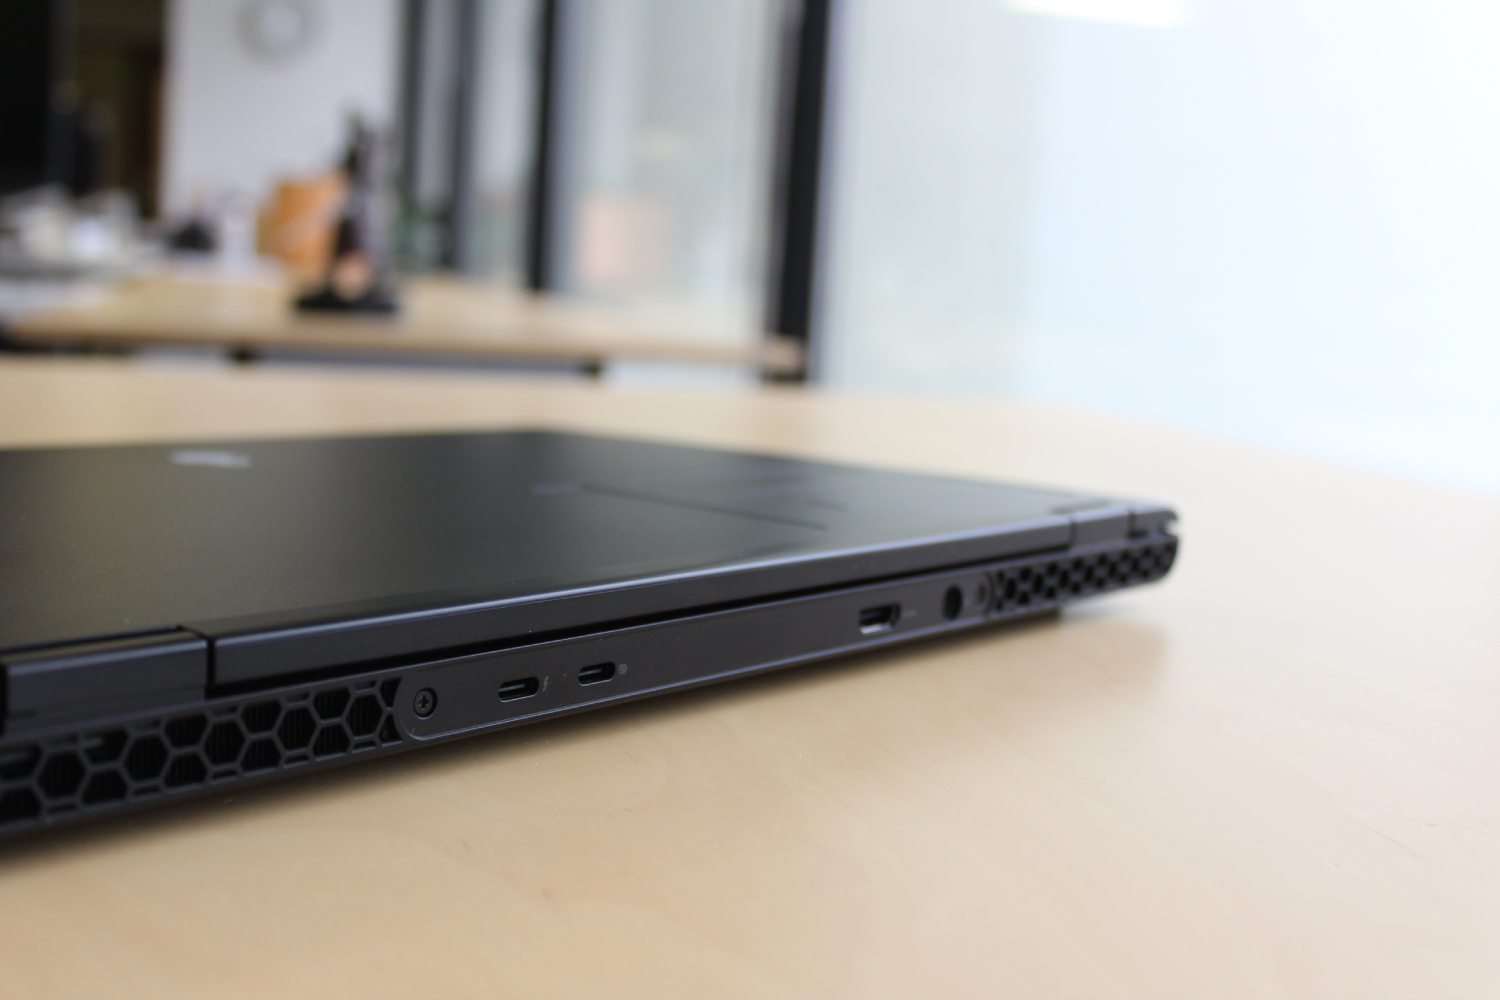 The ports on the back of the Alienware m16 R2.